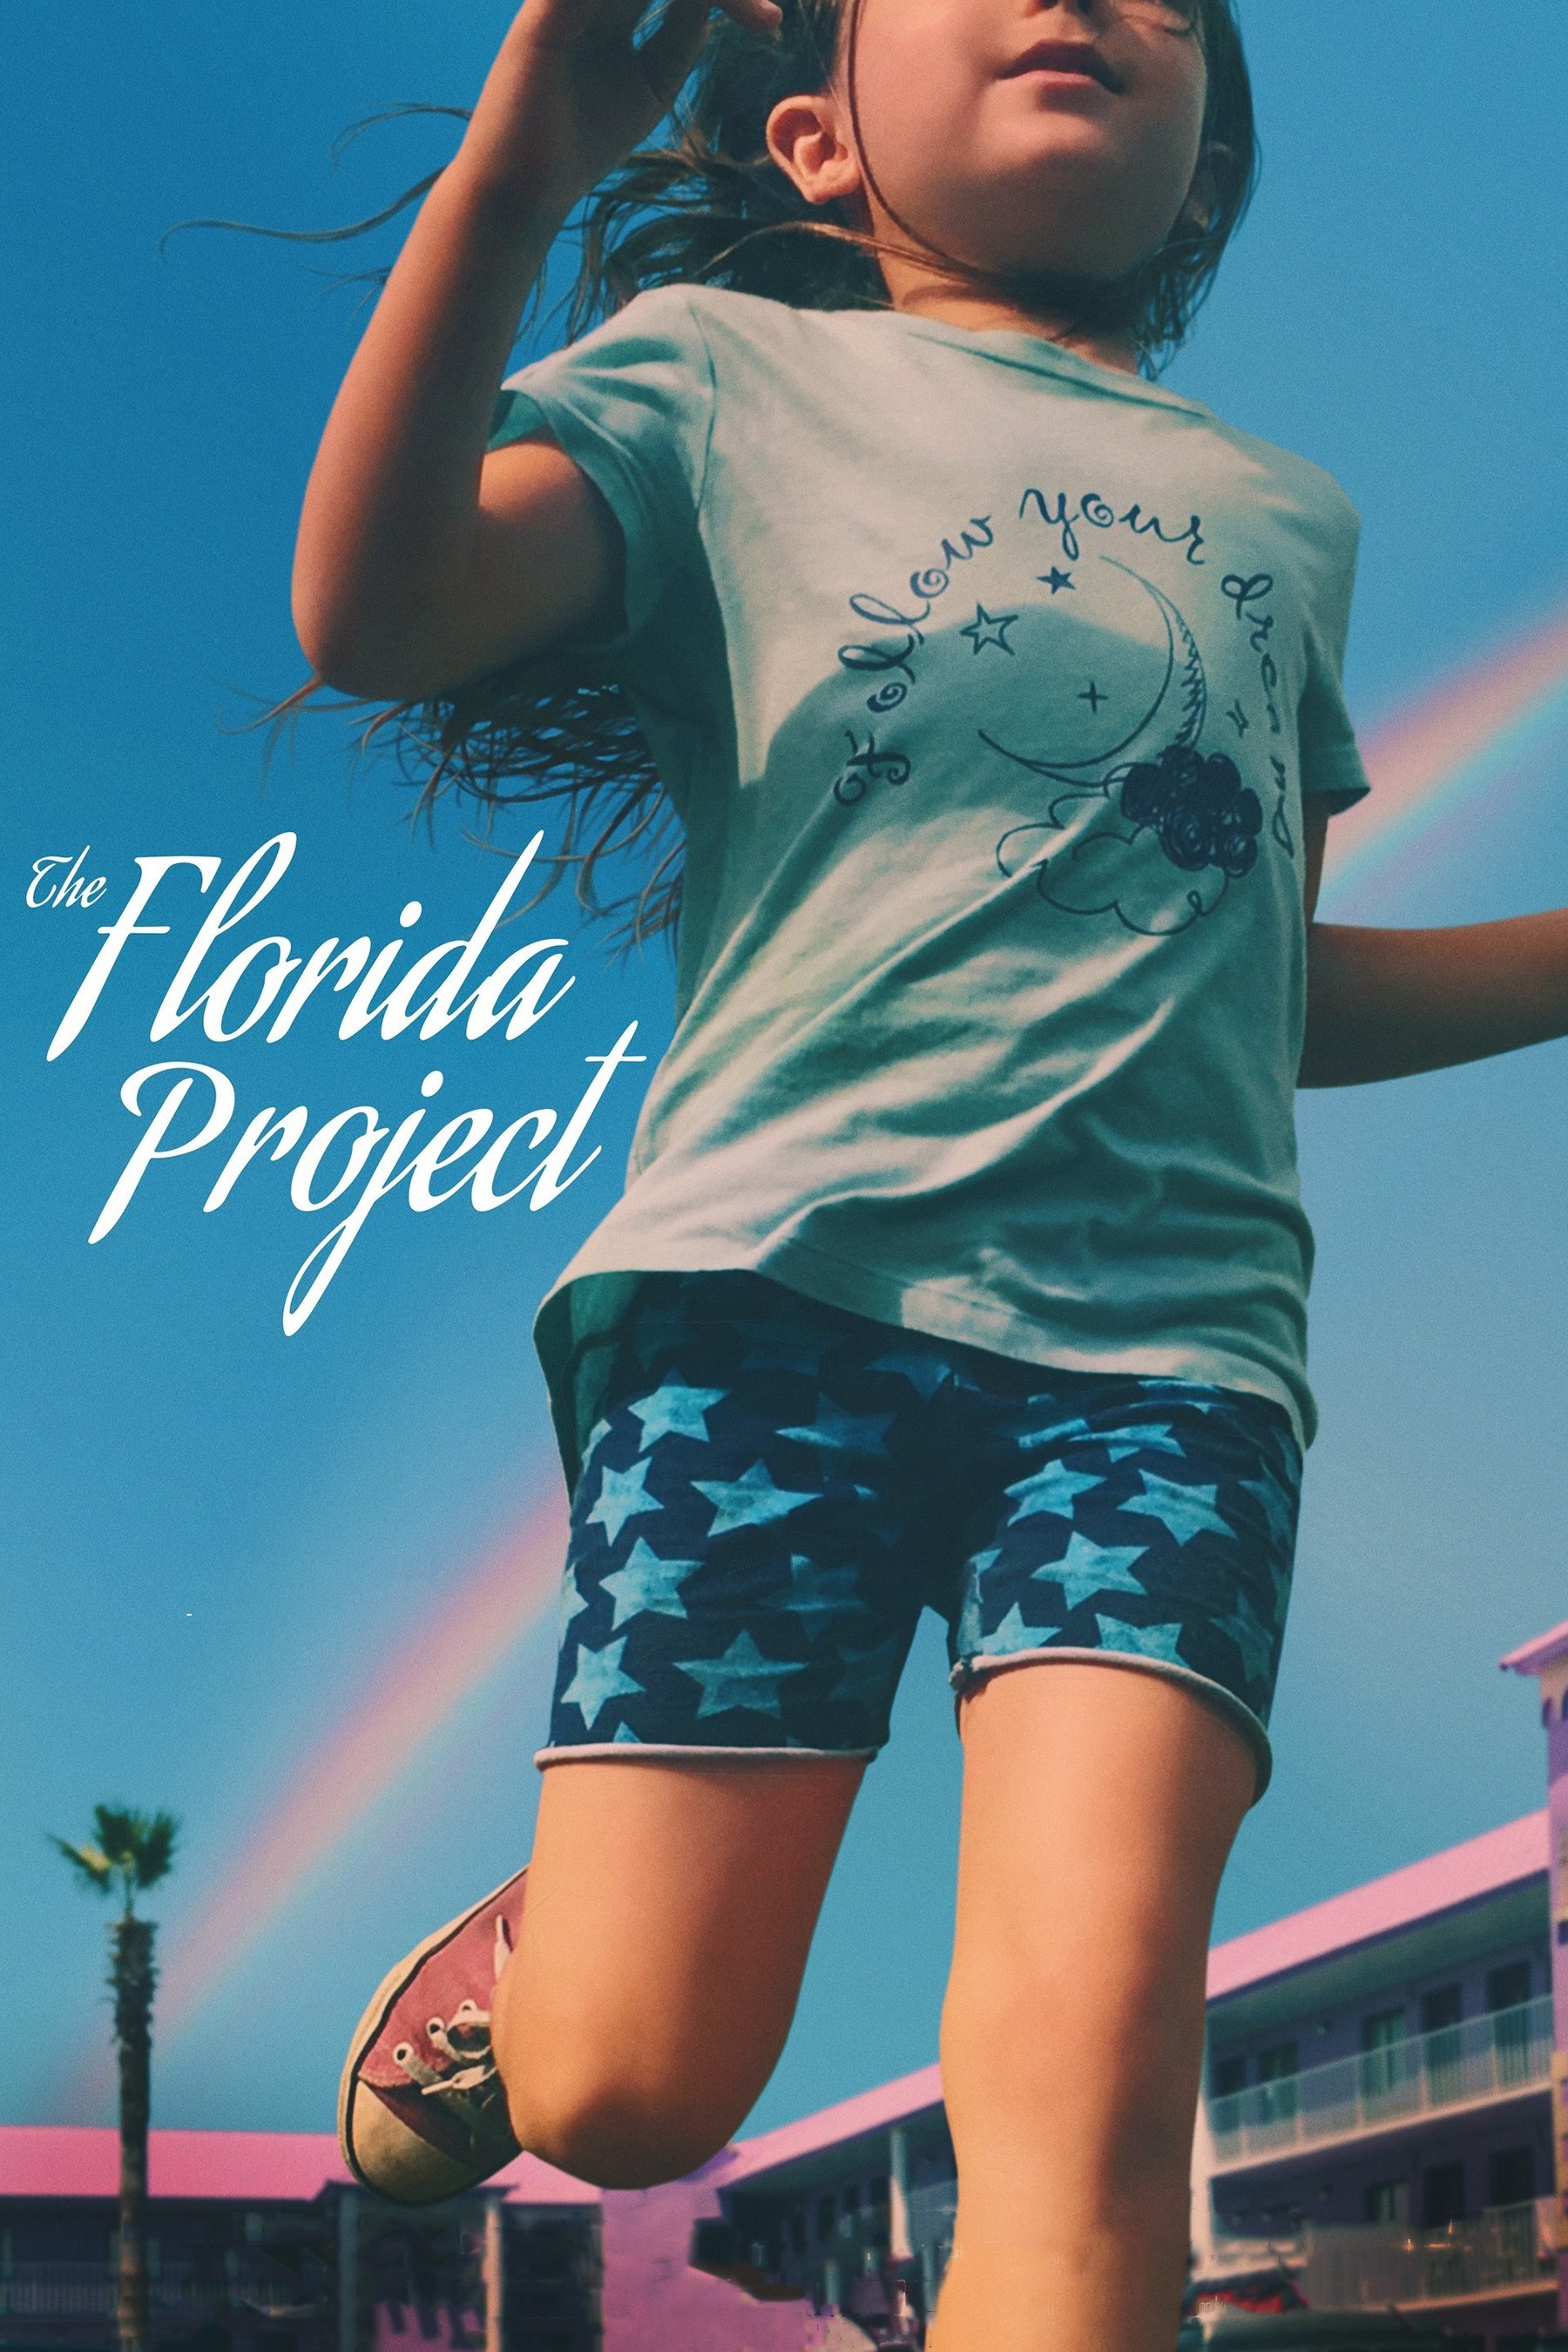 Best Movie of 2017 … The Florida Project, The Circle?